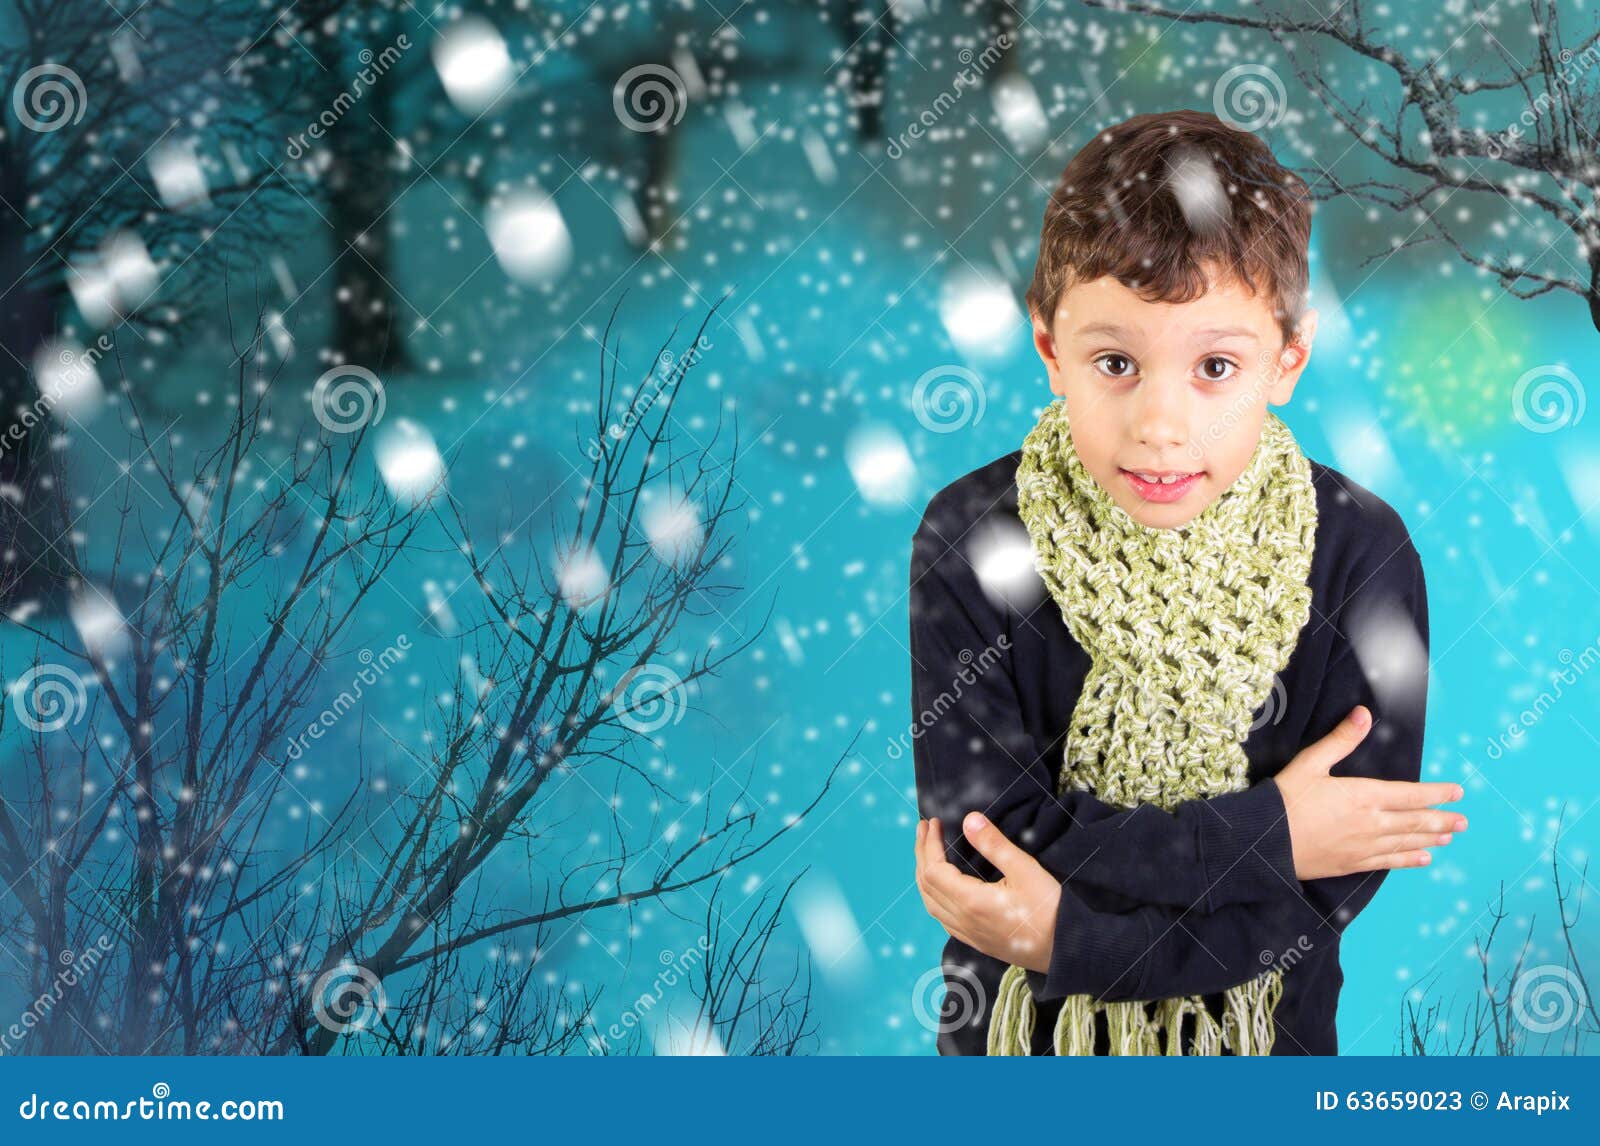 Little Boy Feeling Cold Under Snow Stock Image - Image of child ...